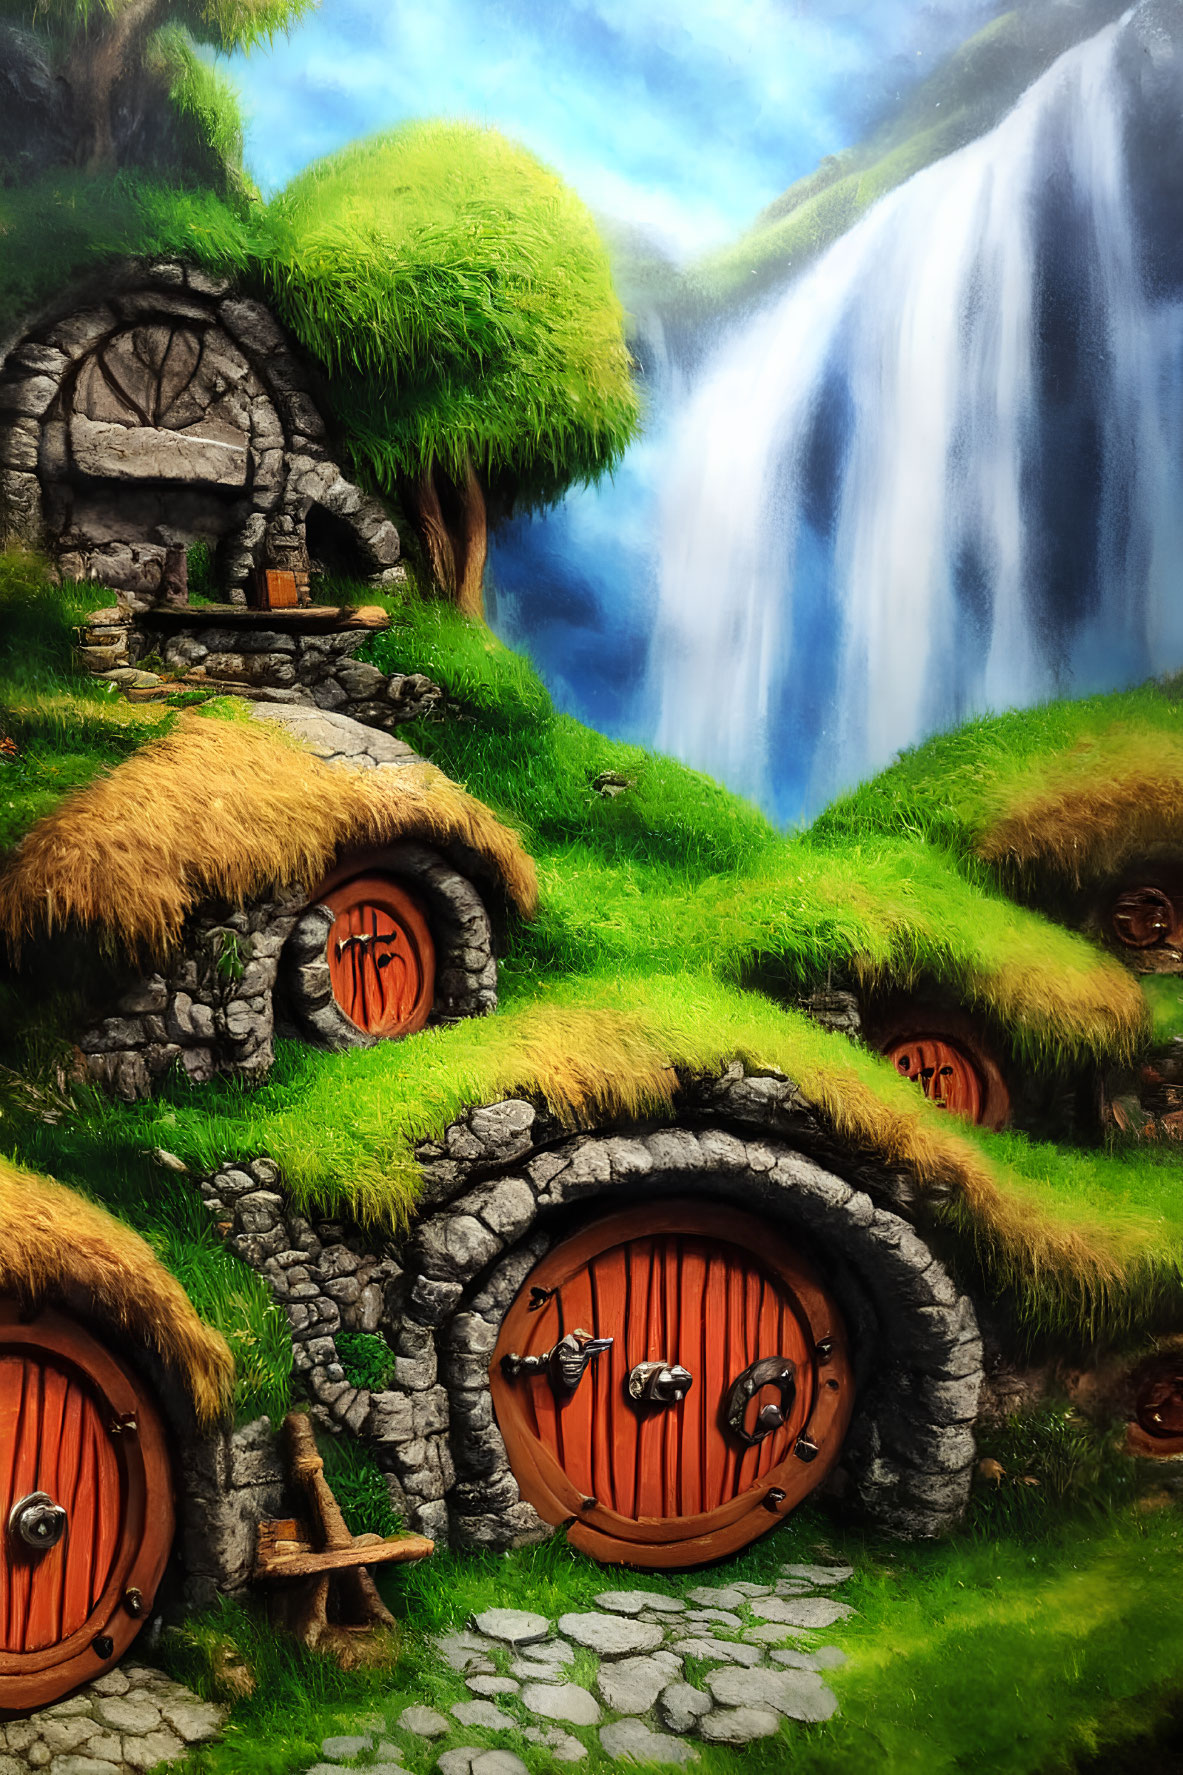 Whimsical hobbit-style hillside homes with round doors and thatched roofs